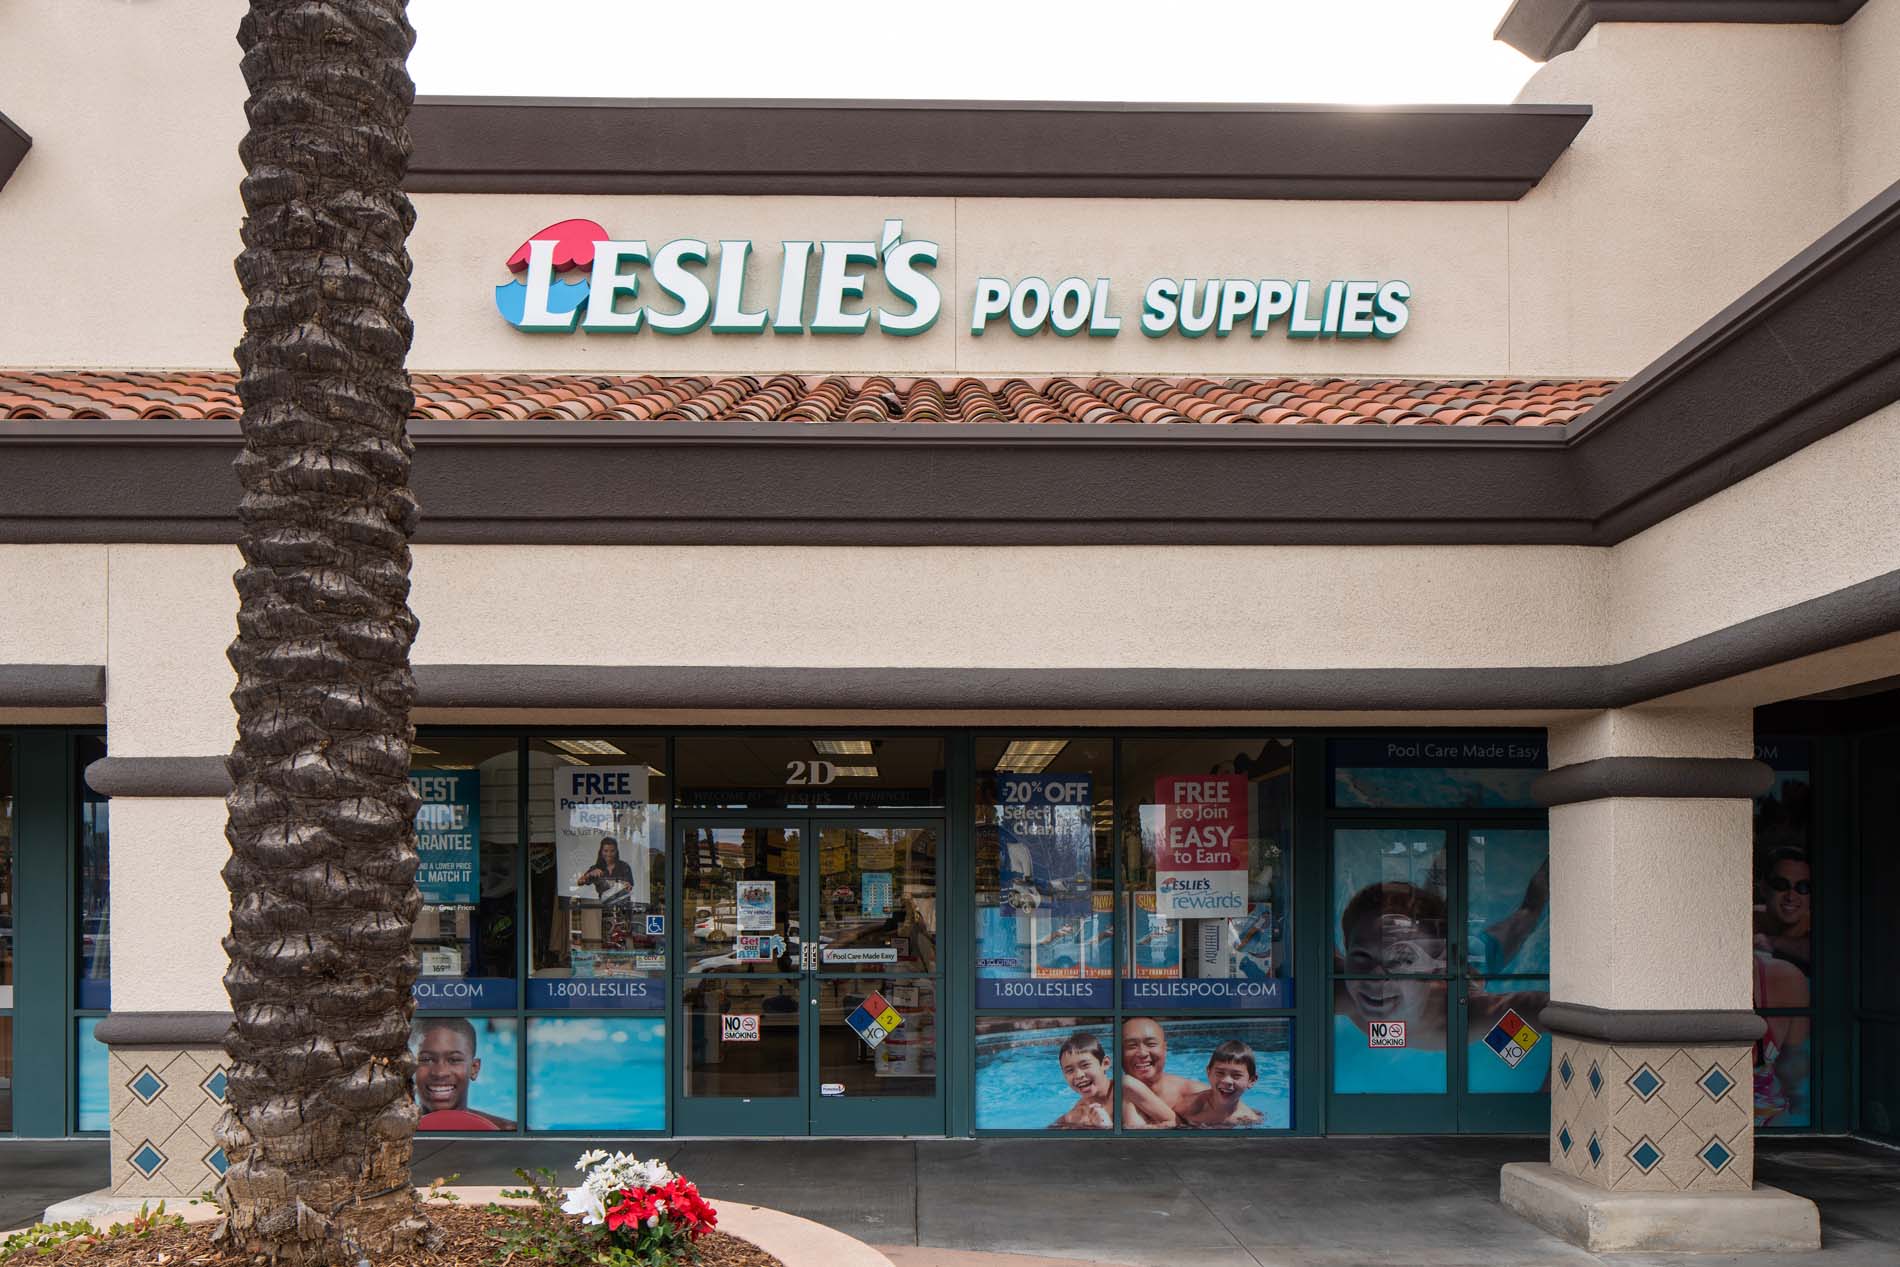 Leslie s Pool Supply Mission Grove Shopping Center